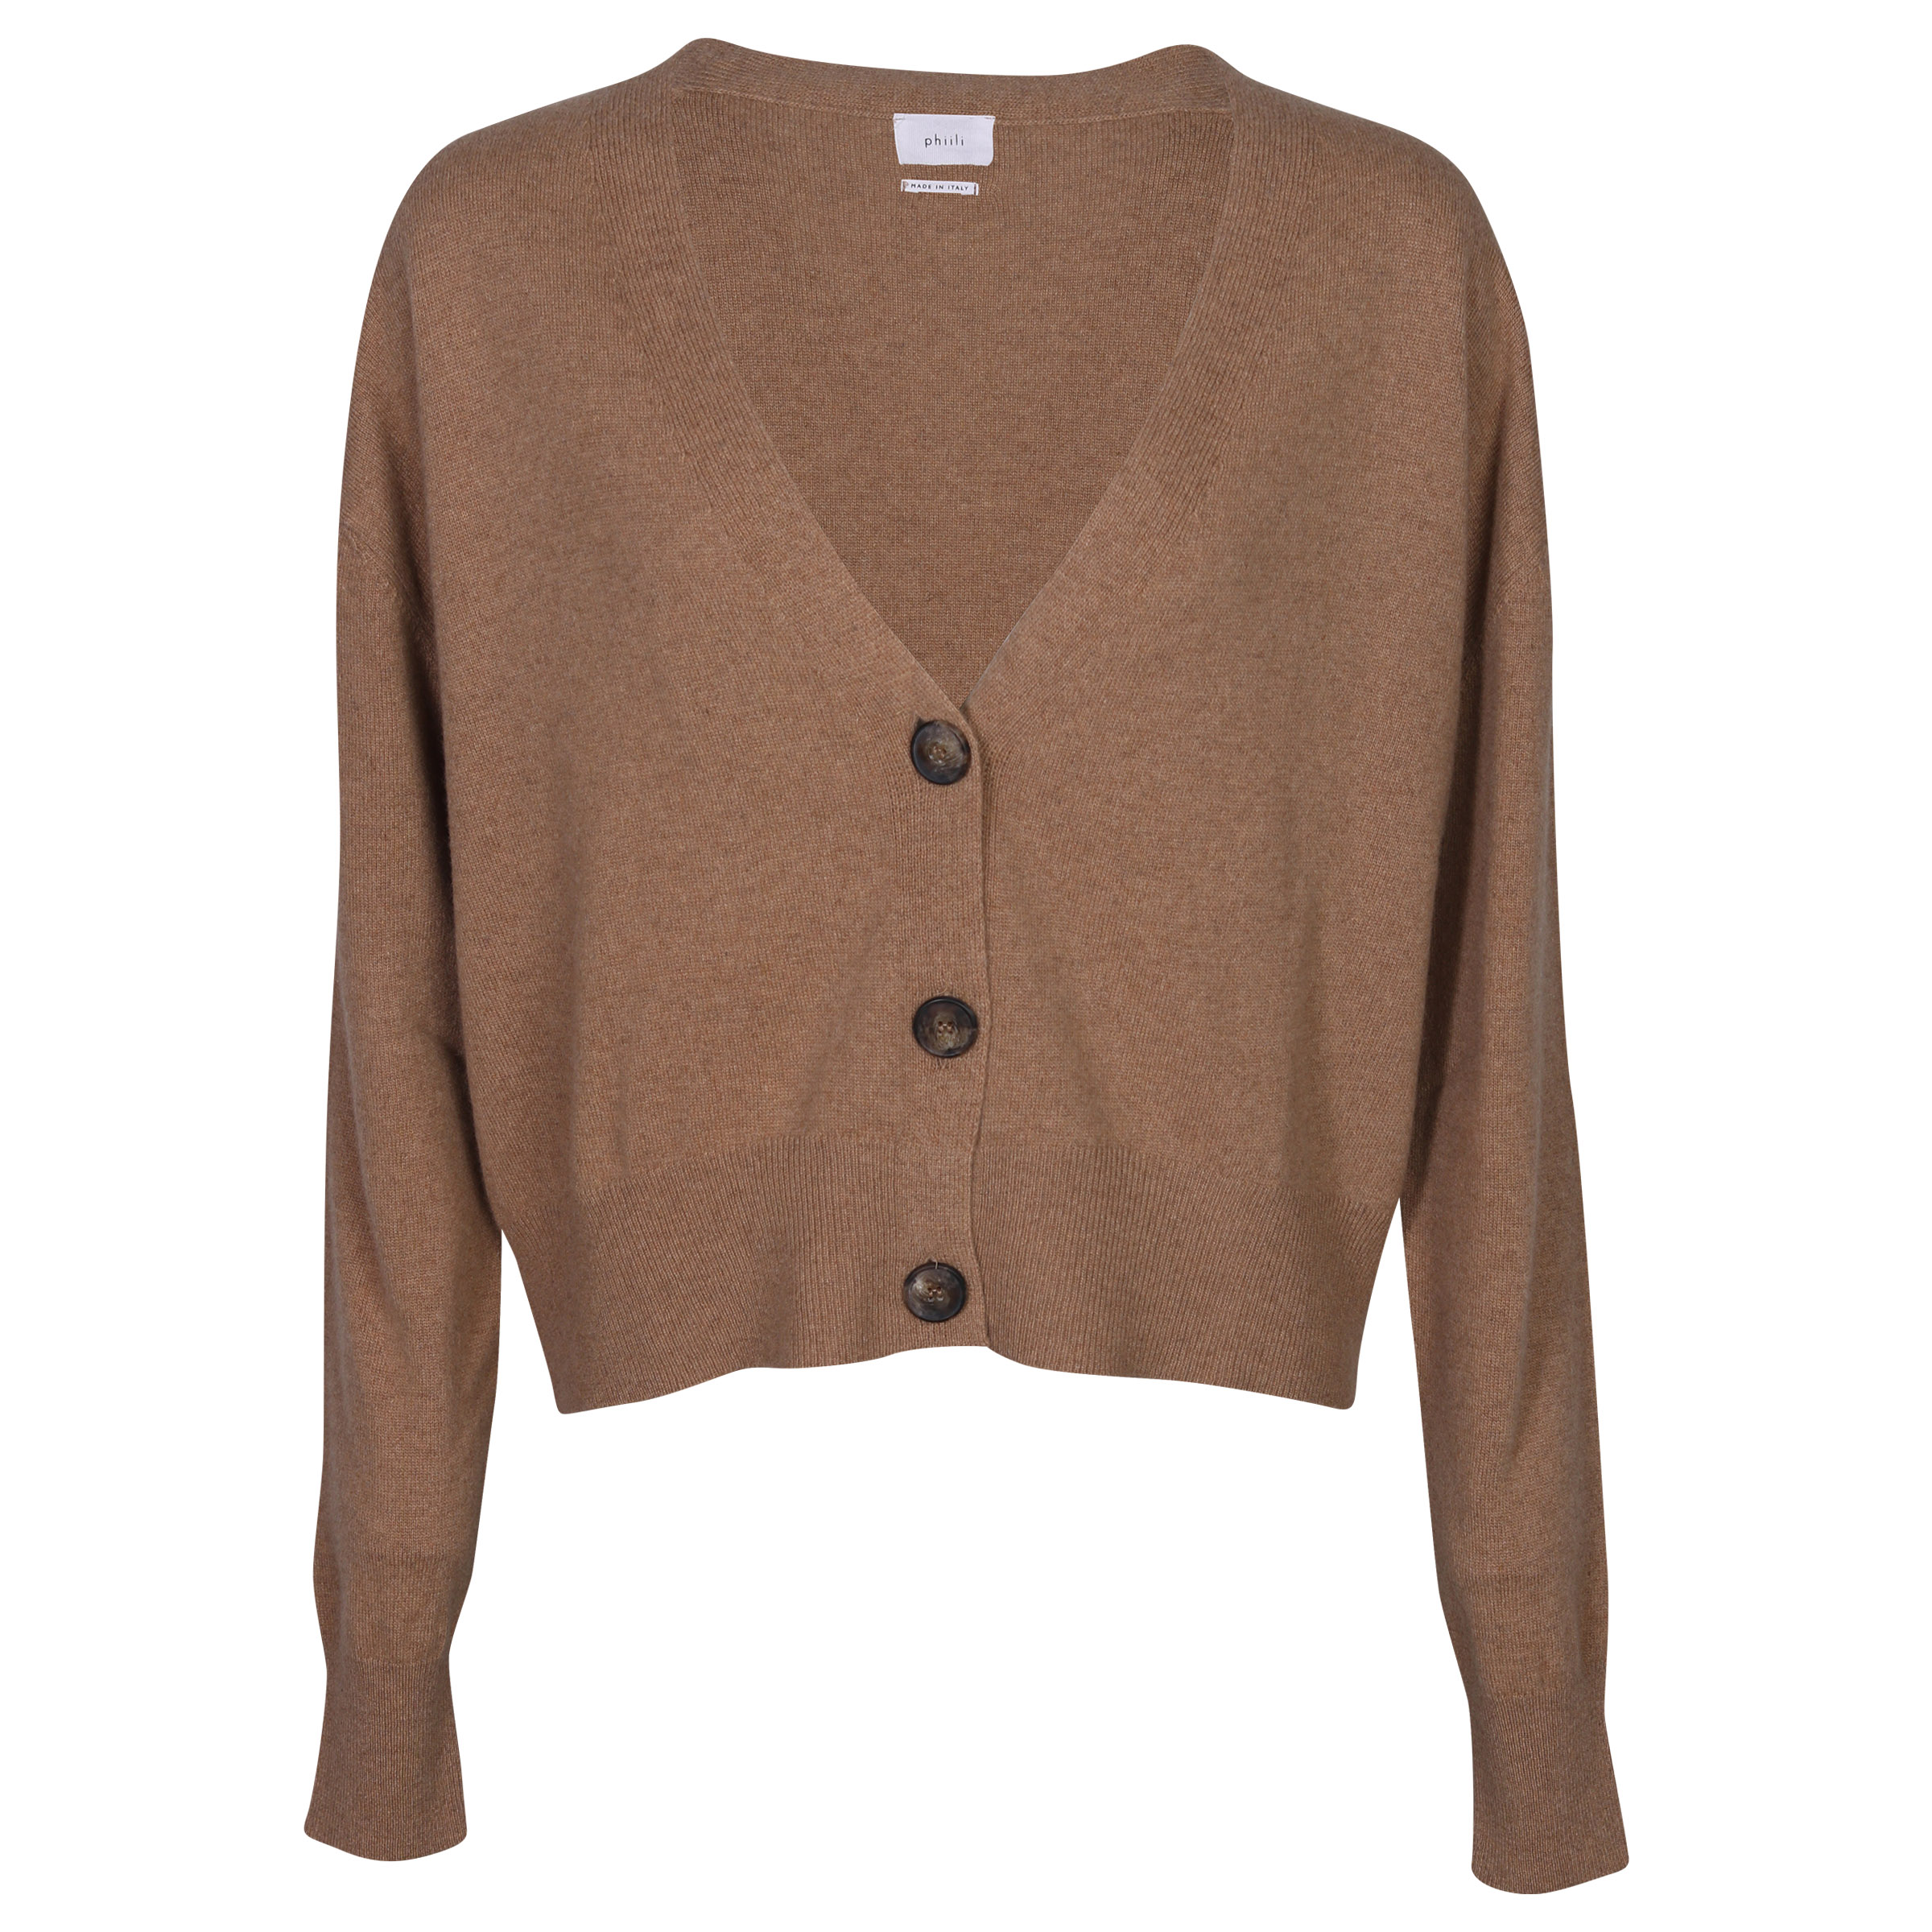 Phiili Recycled Cashmere Cardigan in Camel S/M